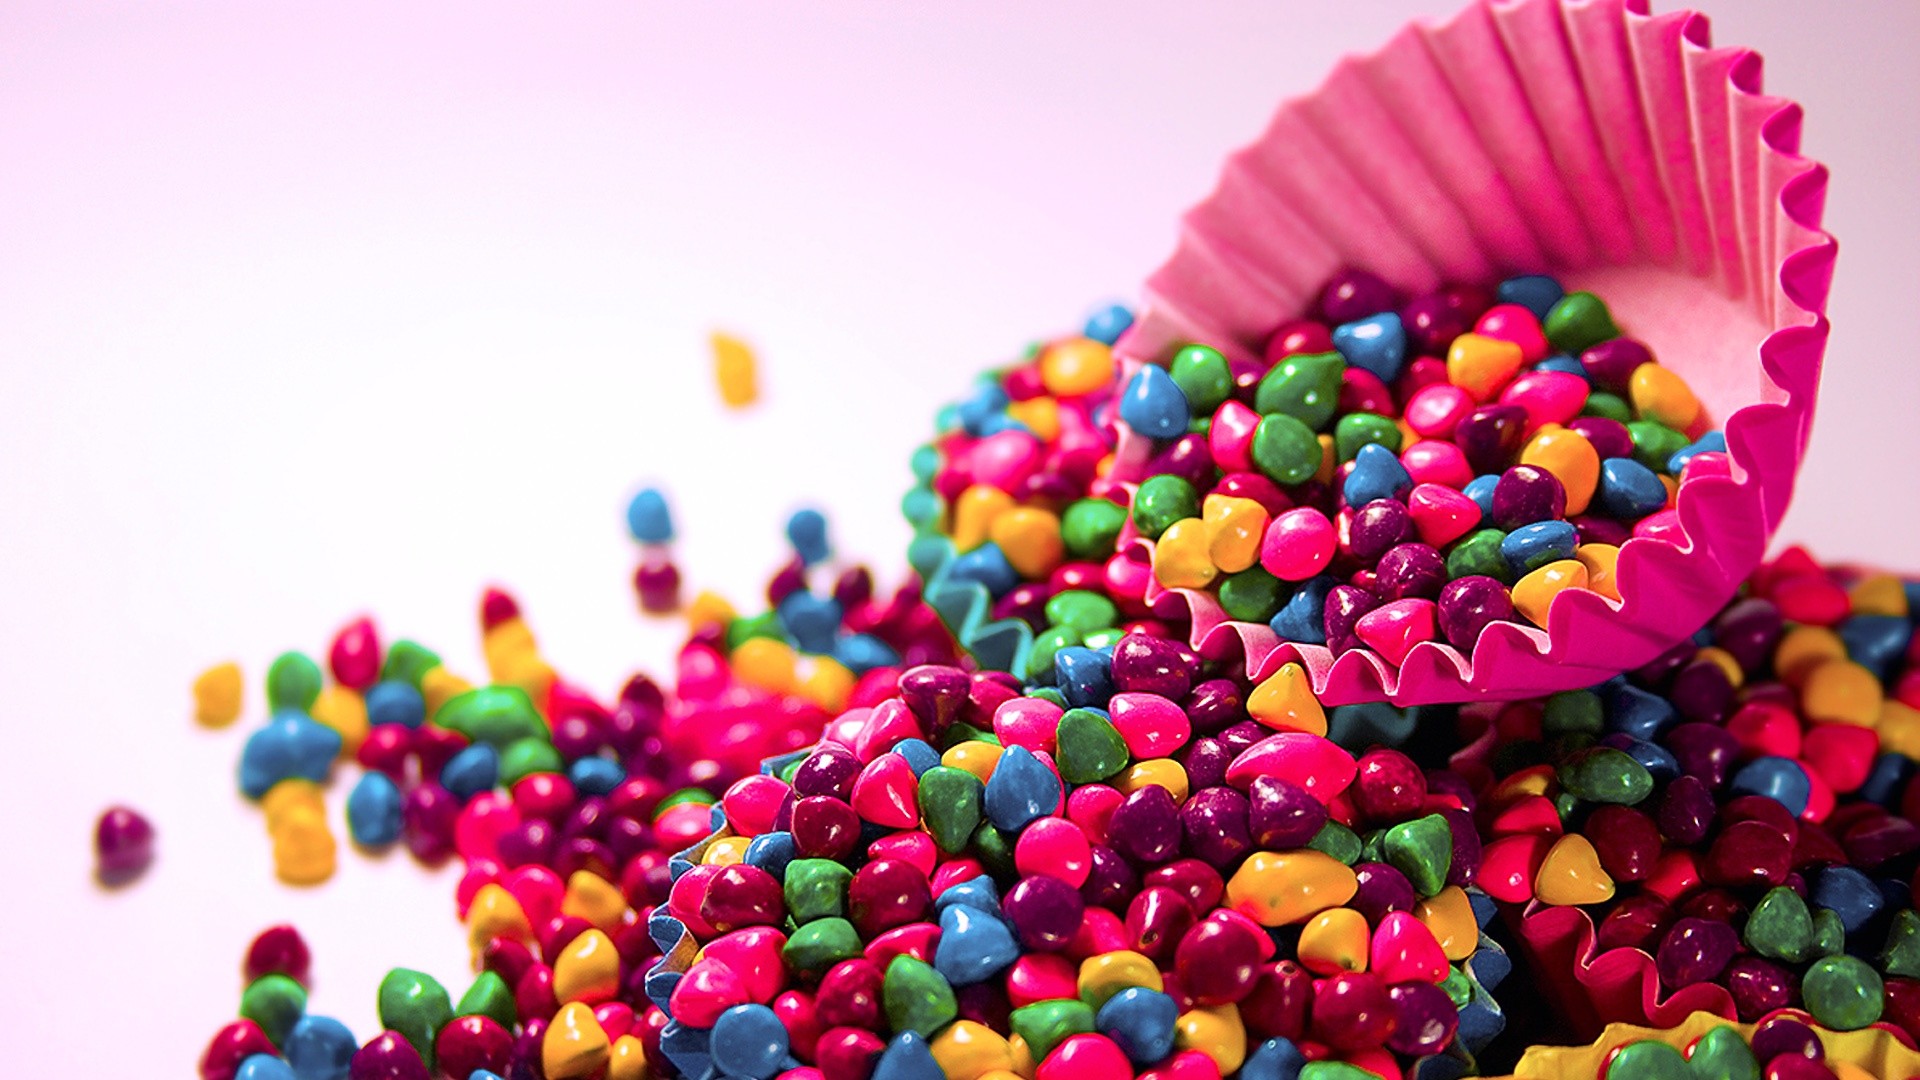 Colorful Candys In Basket Abstract Hd Desktop Wallpapers Daily